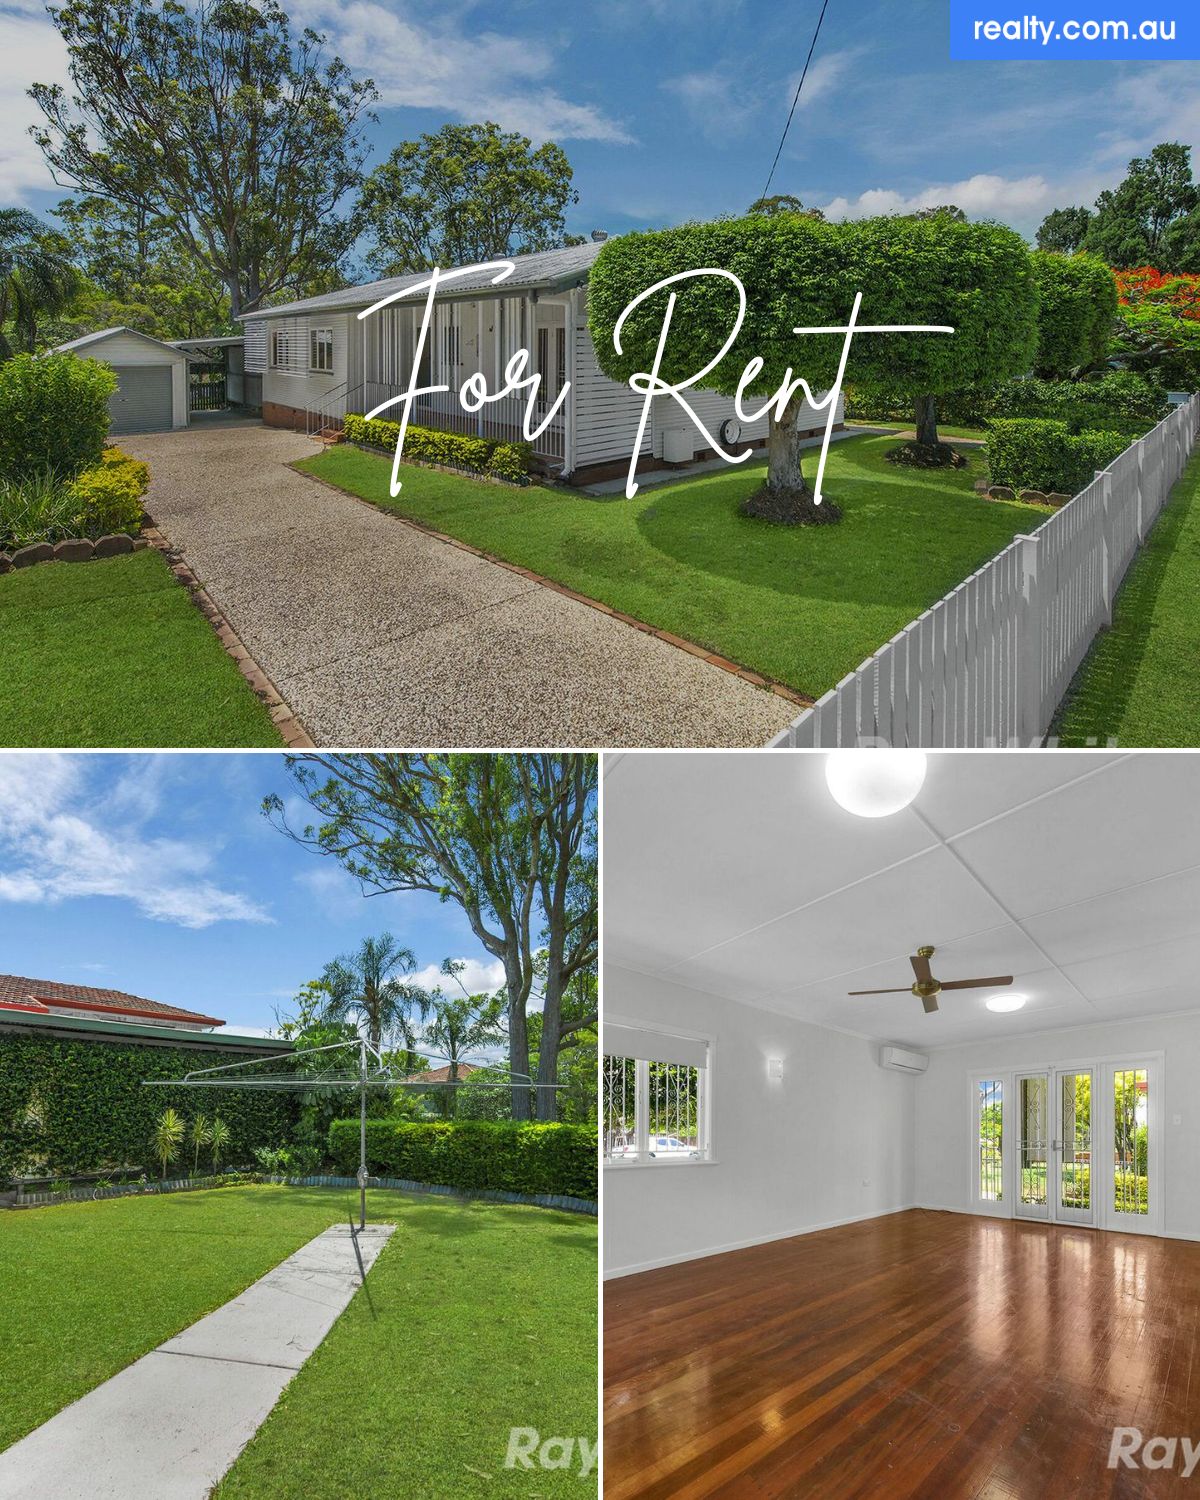 83 Spence Road, Wavell Heights, QLD 4012 | Realty.com.au